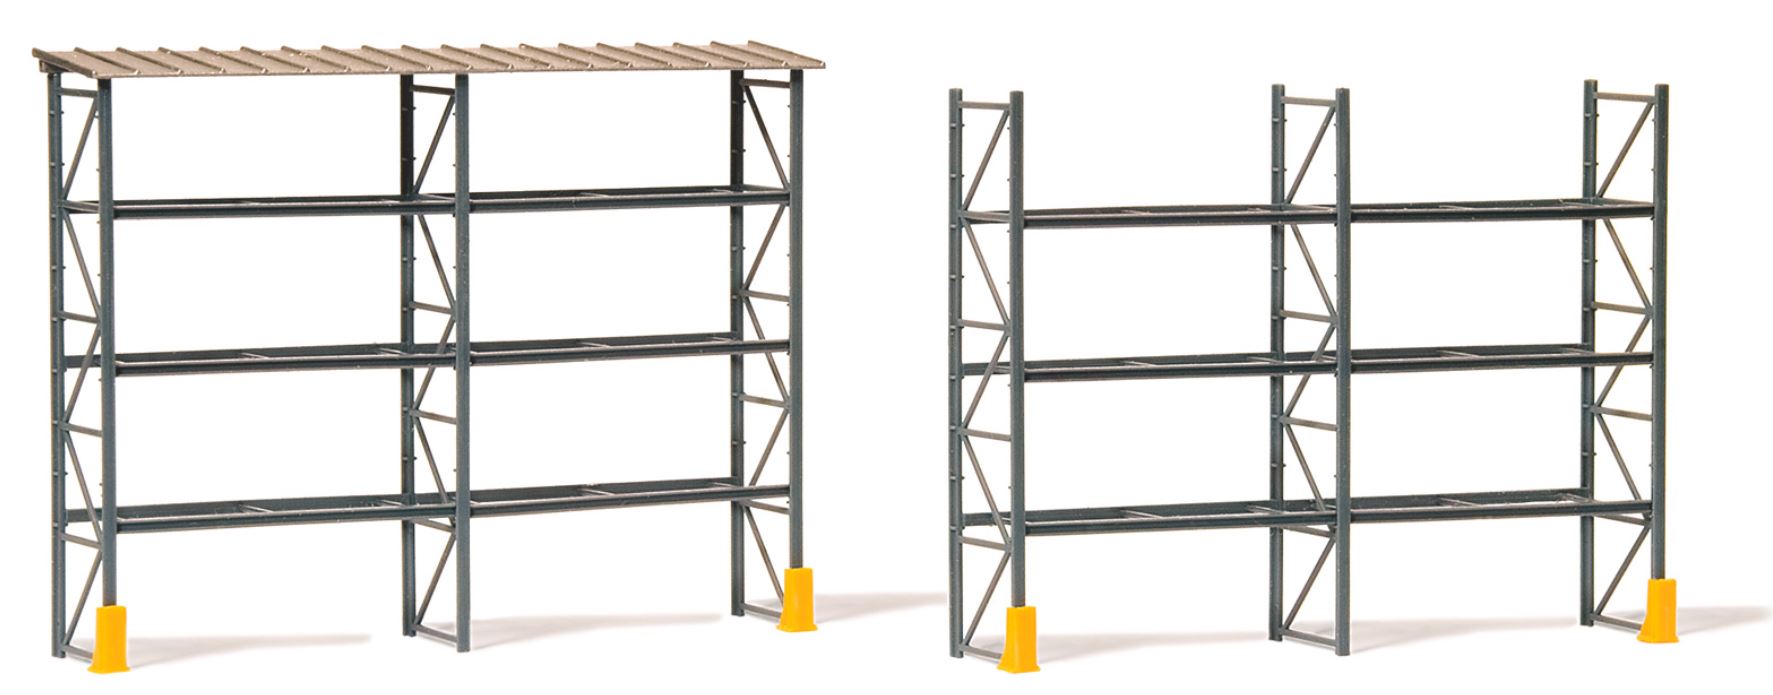 Preiser 17125 H0 Industrial Pallet Racking For 48 Euro-Pallets, With Roofing